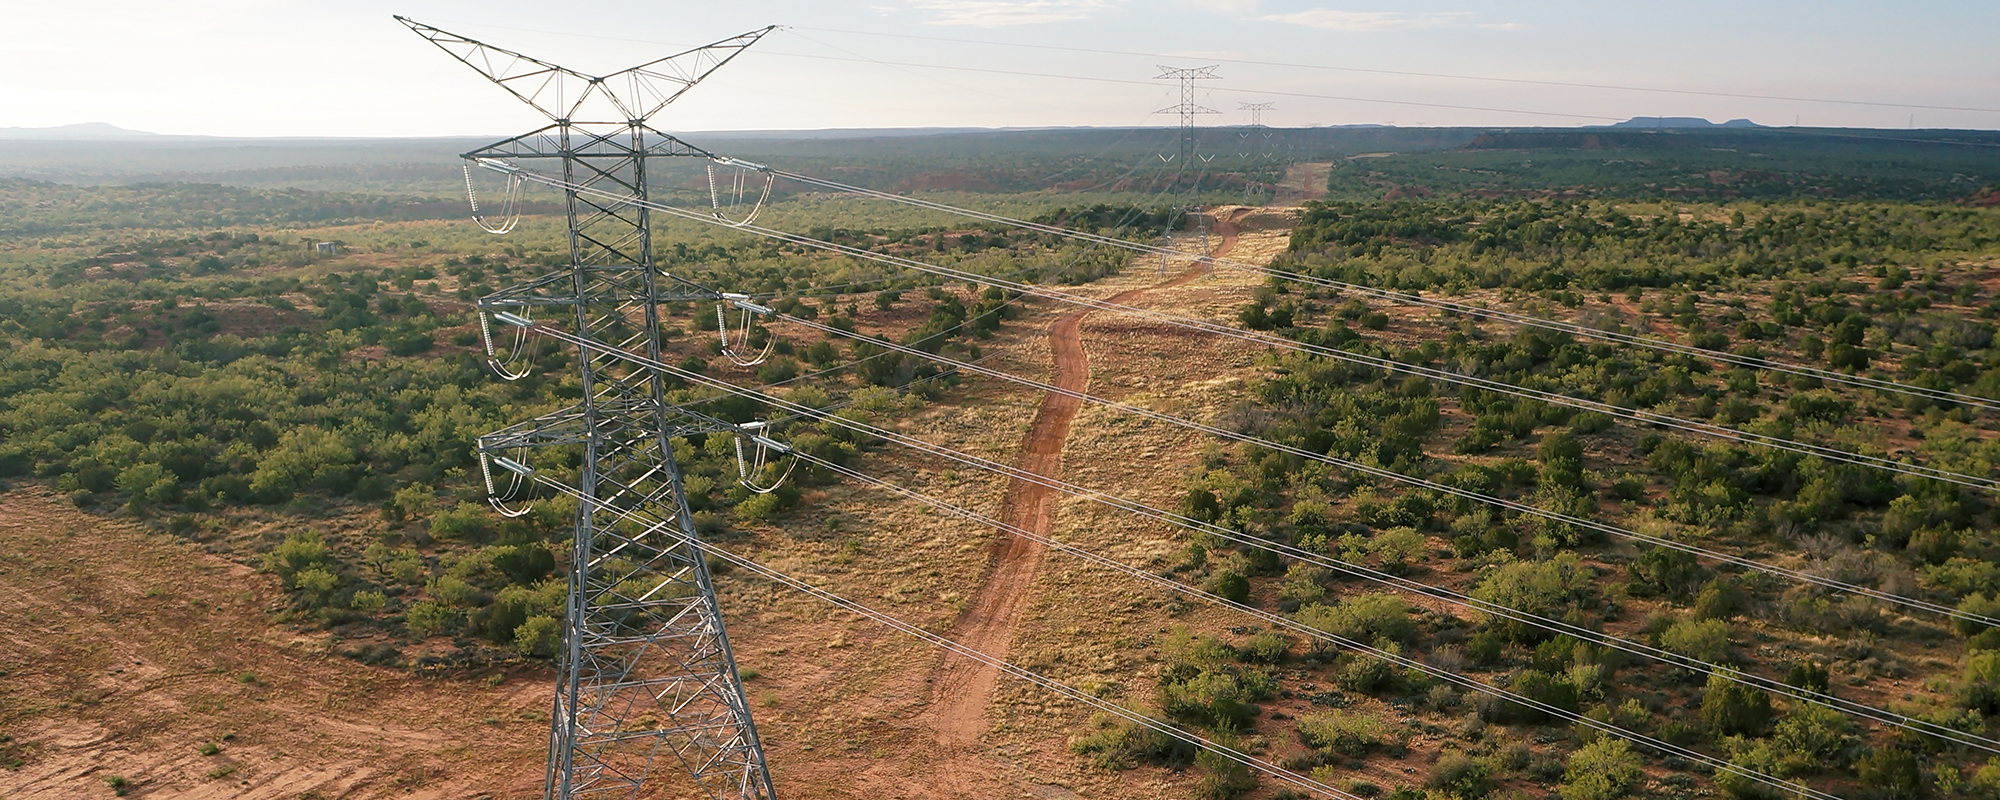   Energy Transmission for Texans     Learn More   